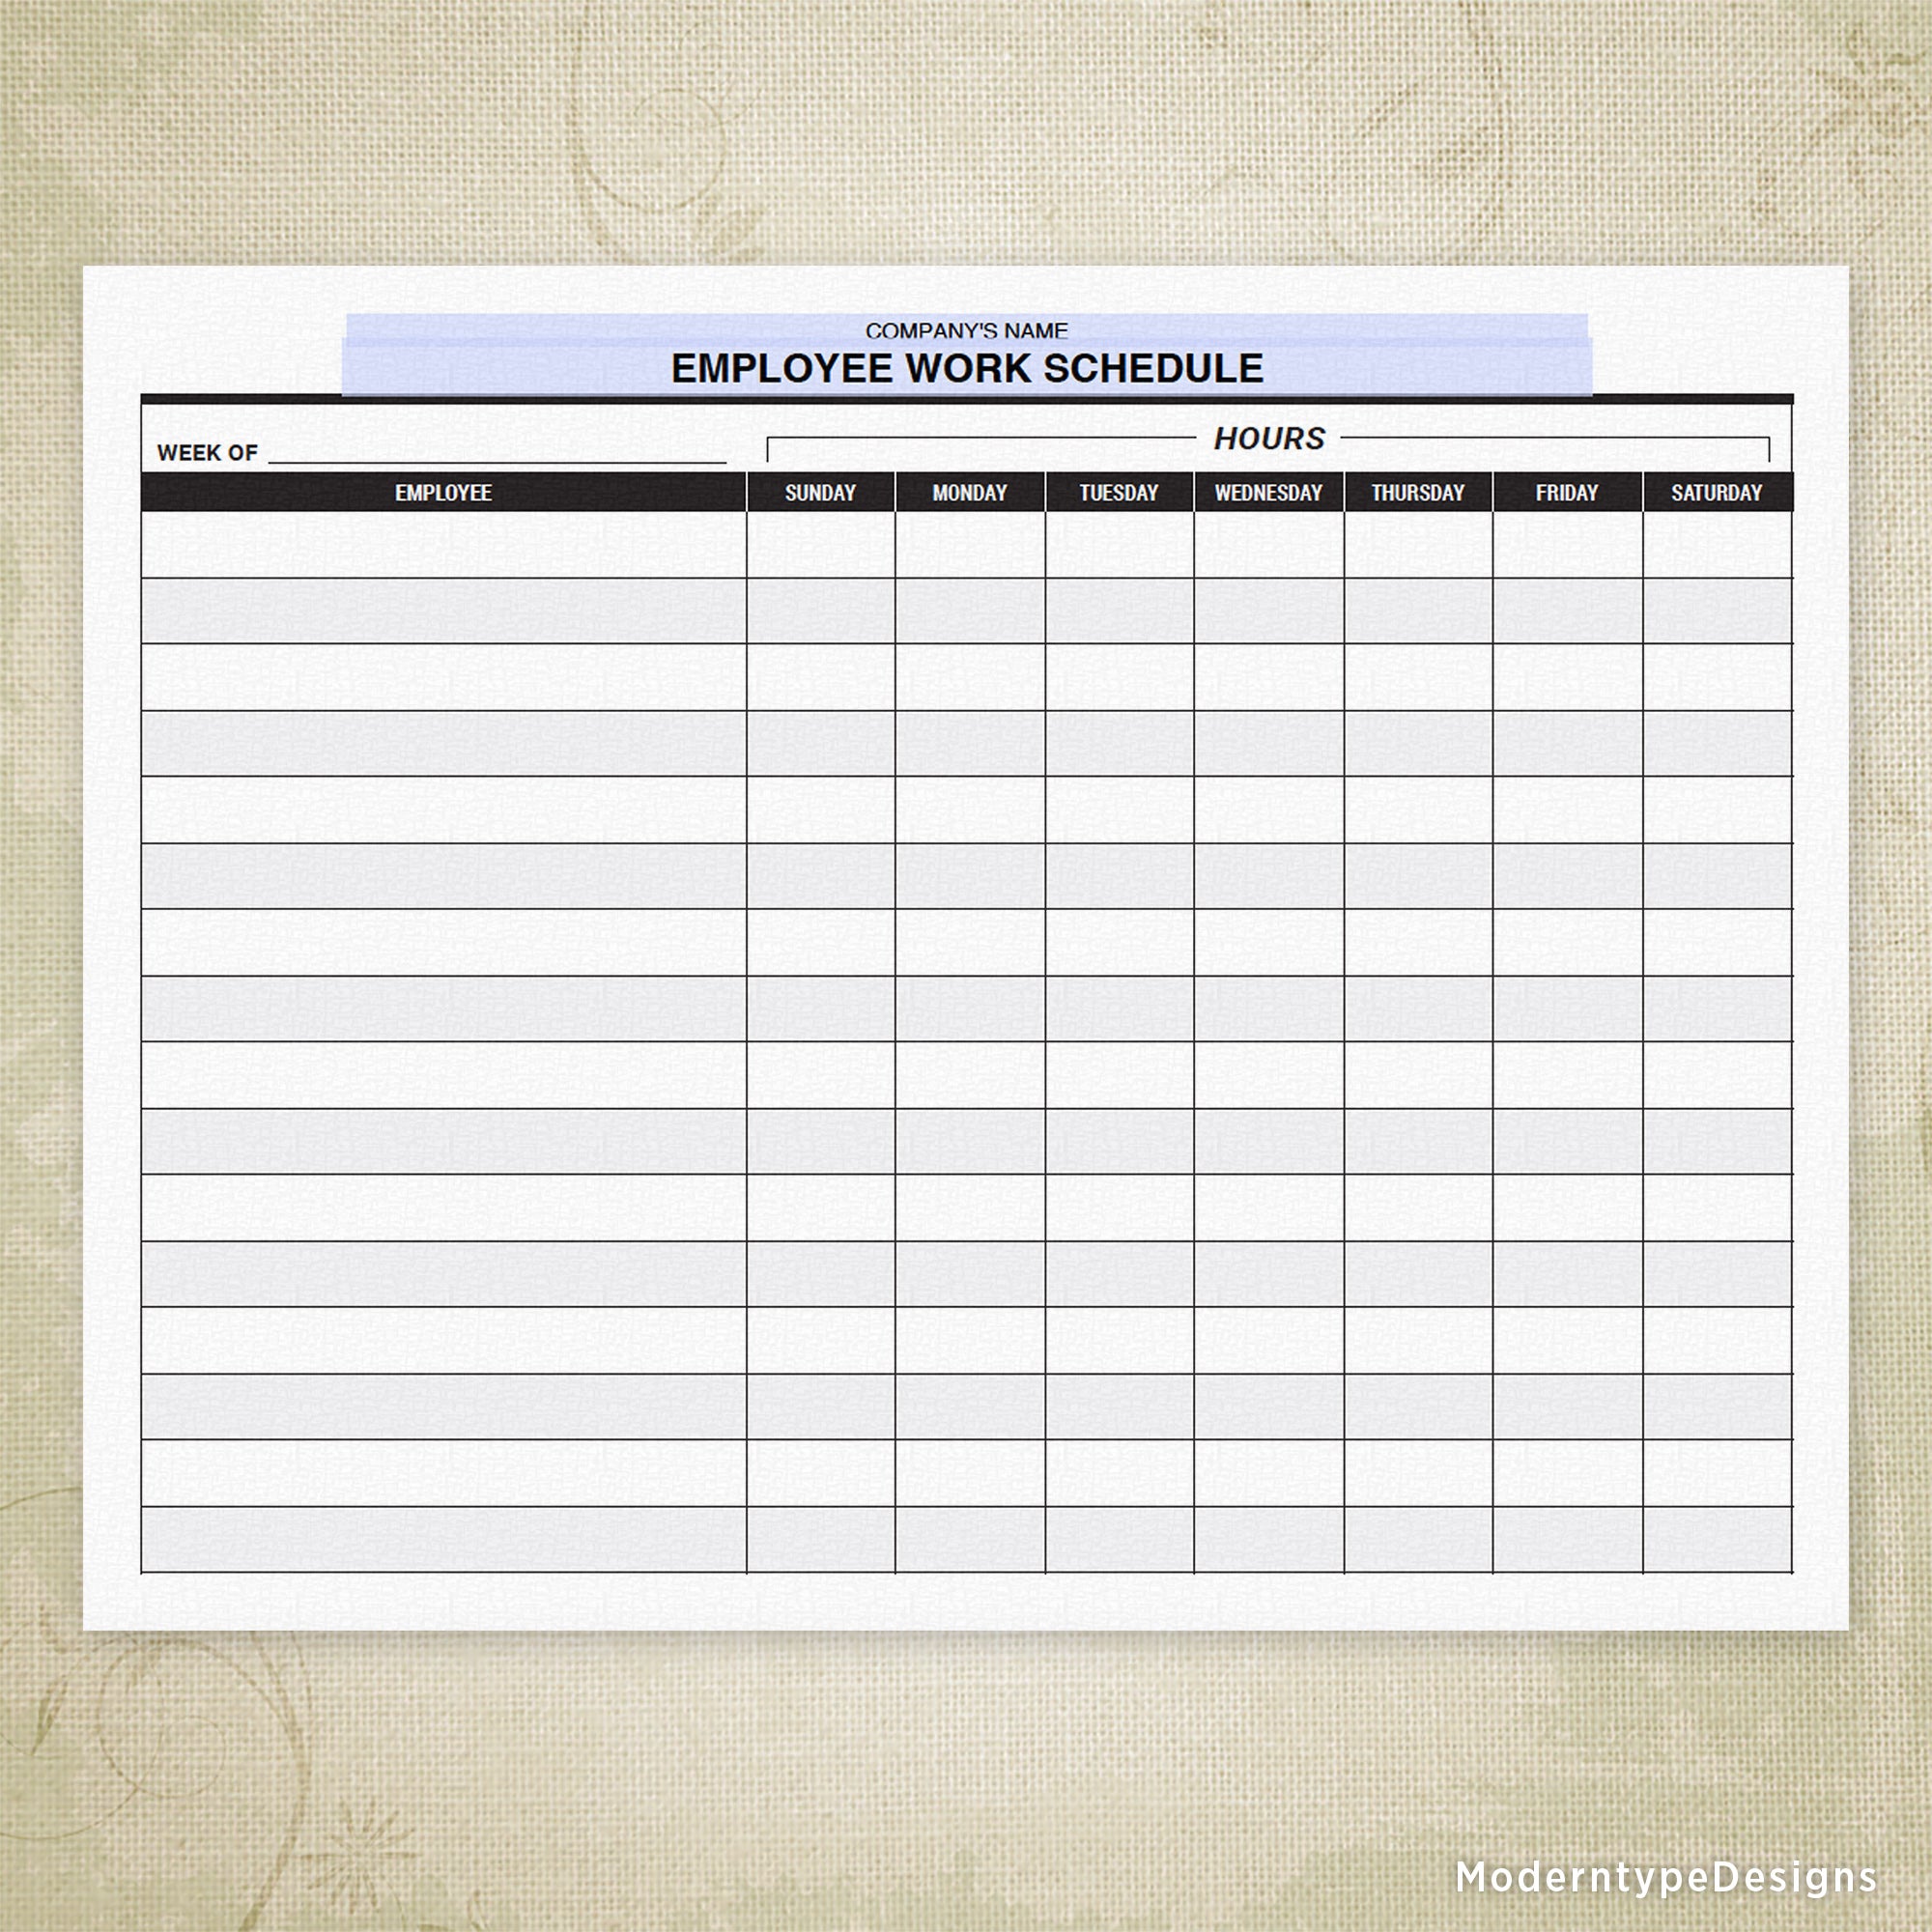 Employee Work Schedule Printable Form, Personalized